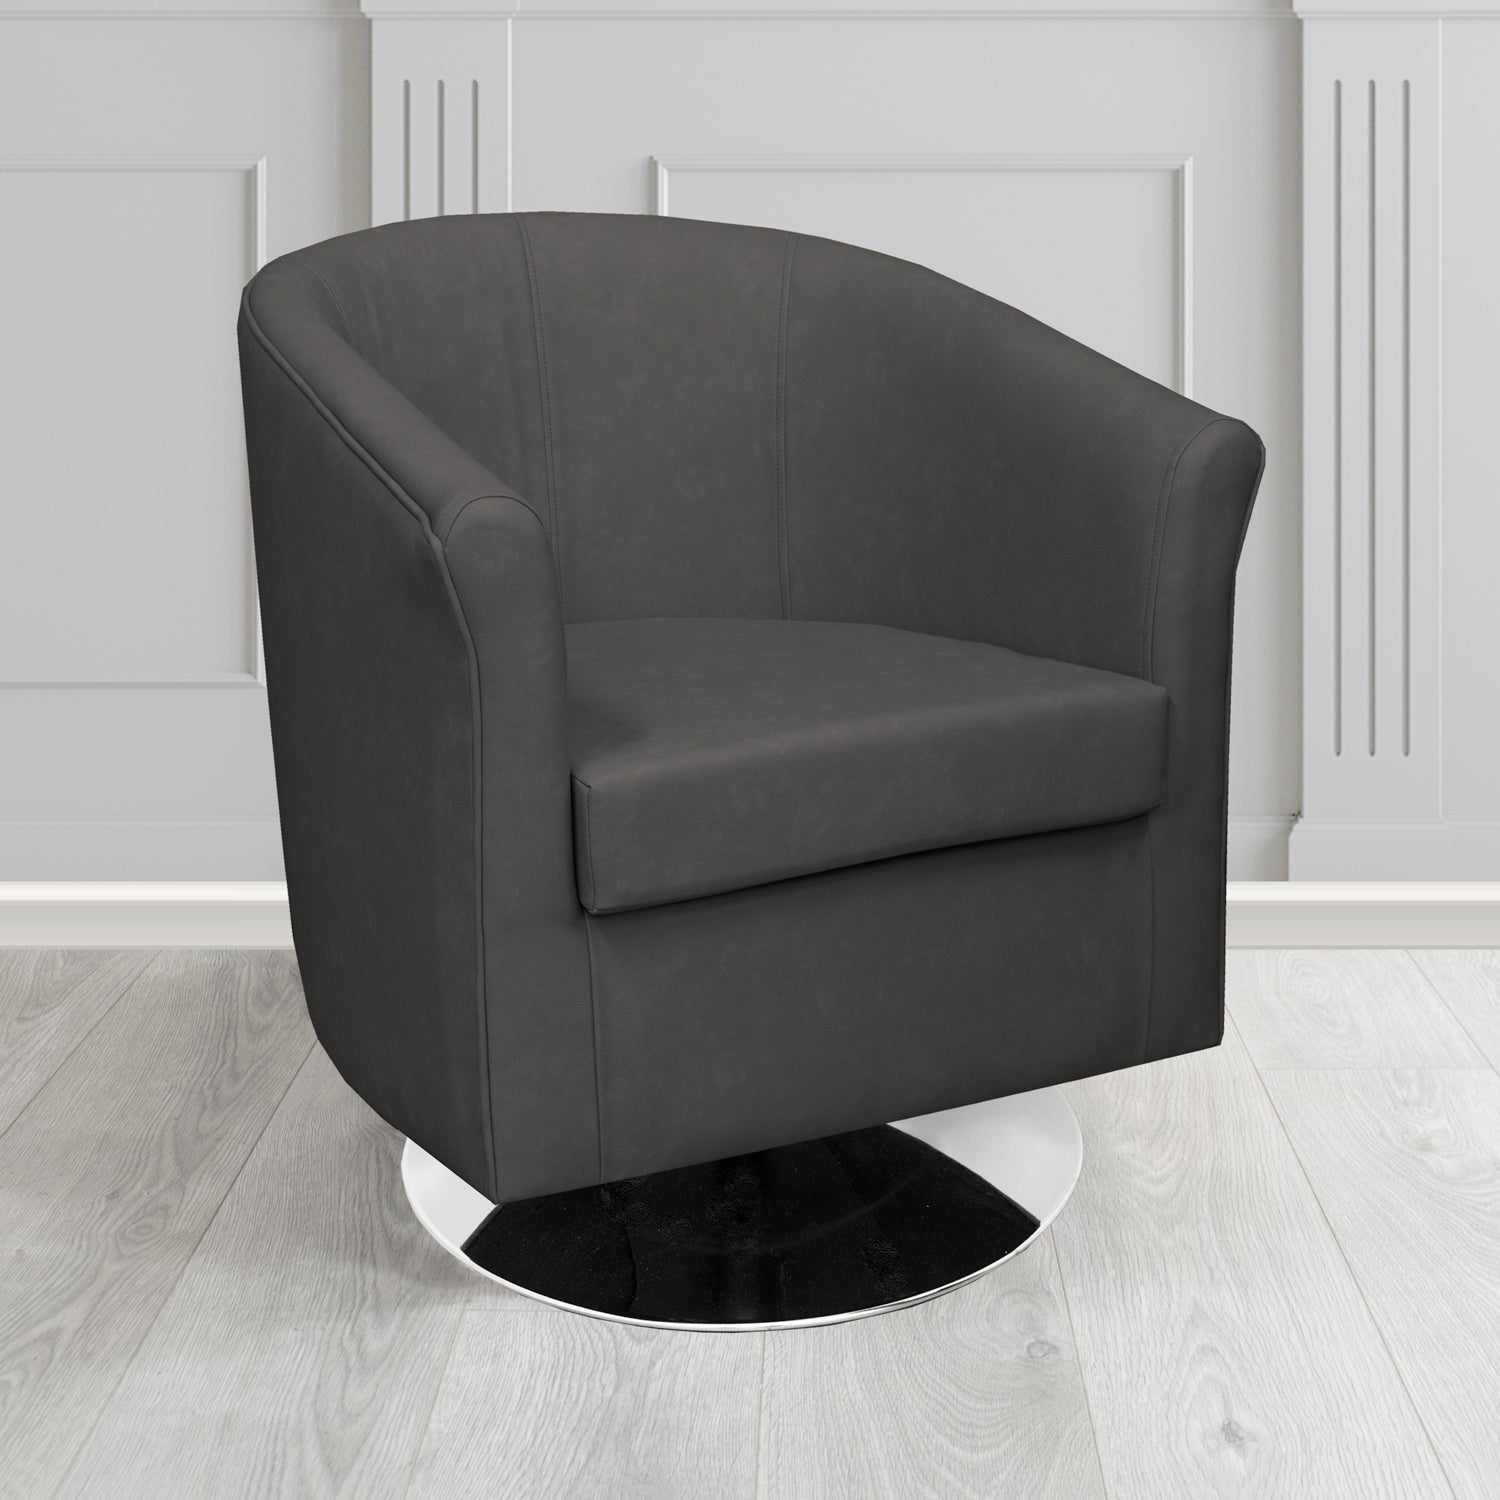 Tuscany Swivel Tub Chair in Infiniti Anthracite INF1862 Antimicrobial Crib 5 Faux Leather - The Tub Chair Shop